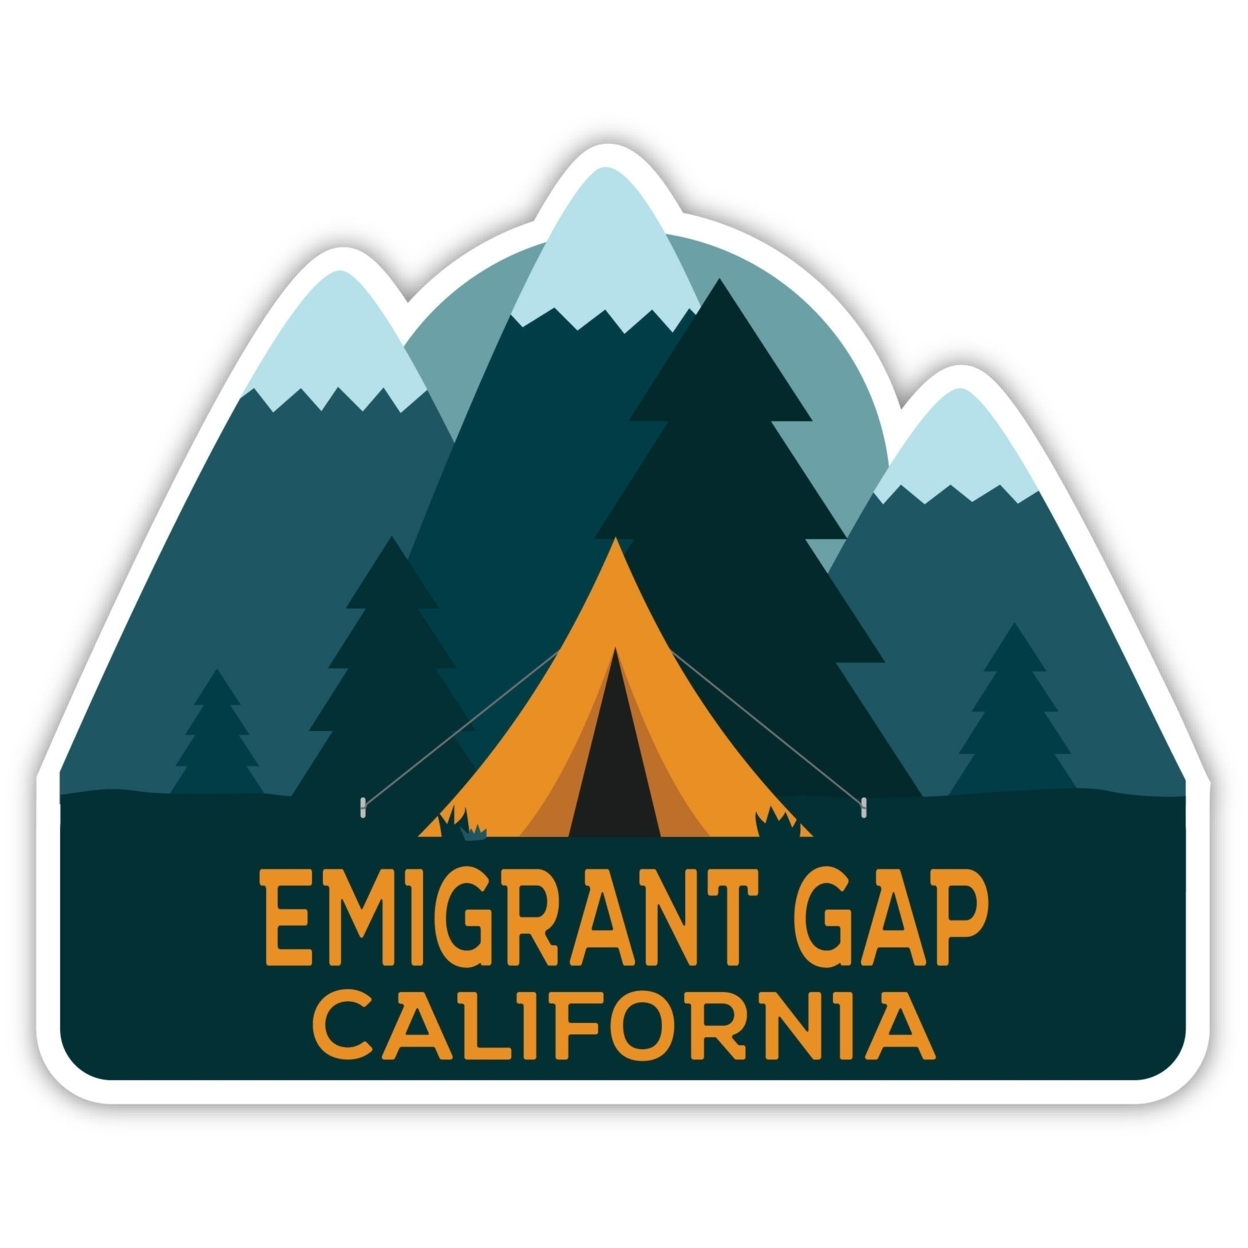 Emigrant Gap California Souvenir Decorative Stickers (Choose Theme And Size) - 4-Pack, 10-Inch, Tent